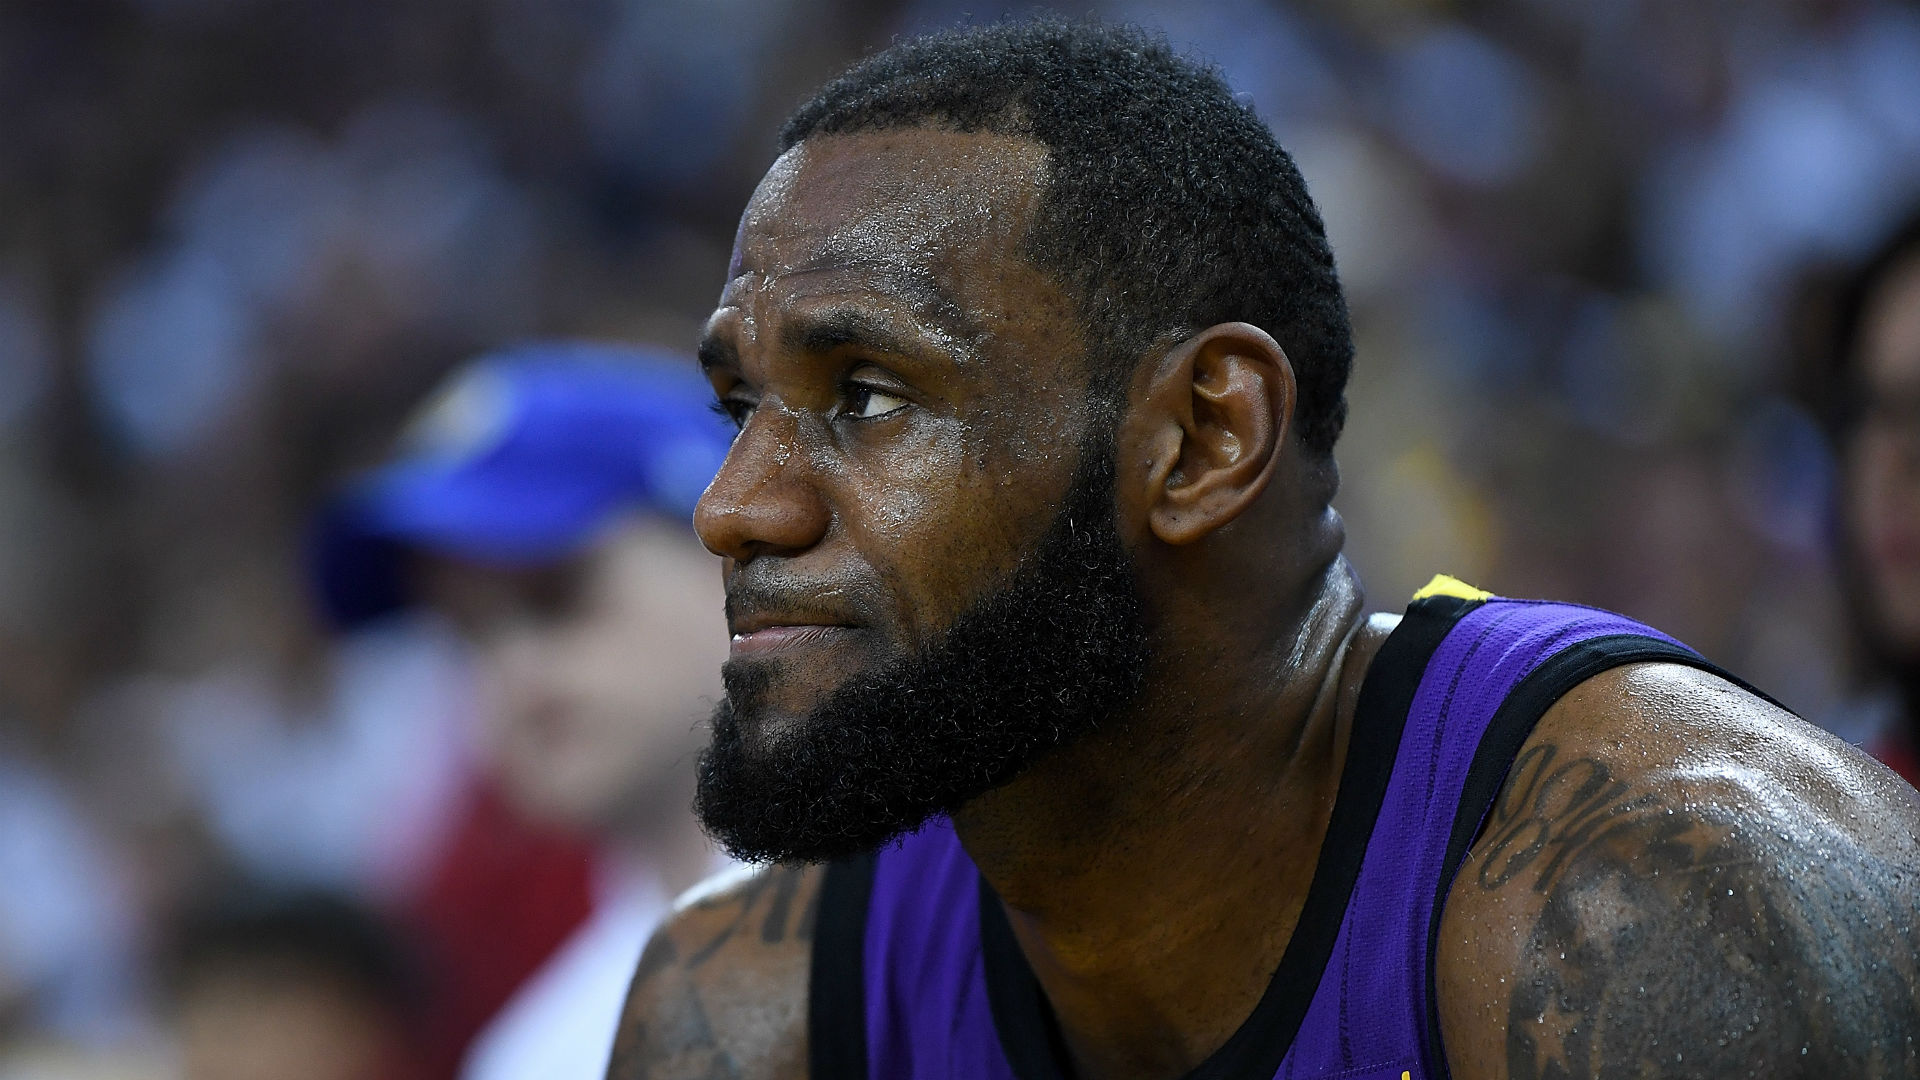 The Los Angeles Lakers said LeBron James will sit out their clash at the Detroit Pistons due to "load management".